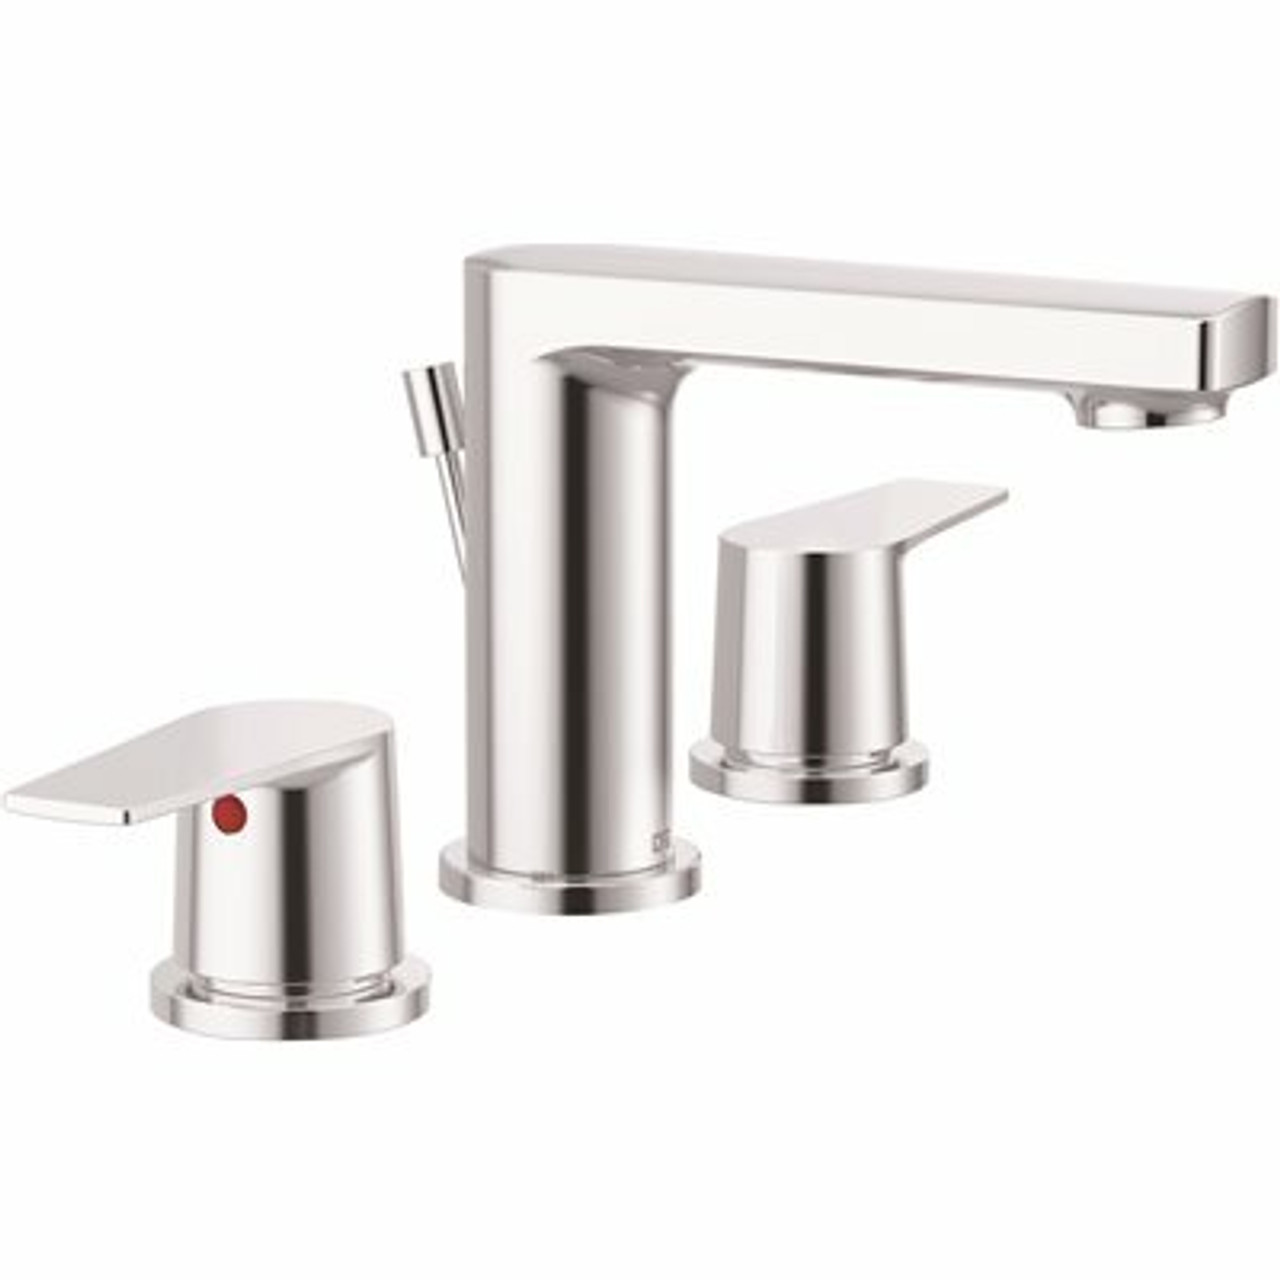 Cleveland Faucet Group Slate 8 In. Widespread 2-Handle Bathroom Faucet With Metal Drain Assembly In Chrome